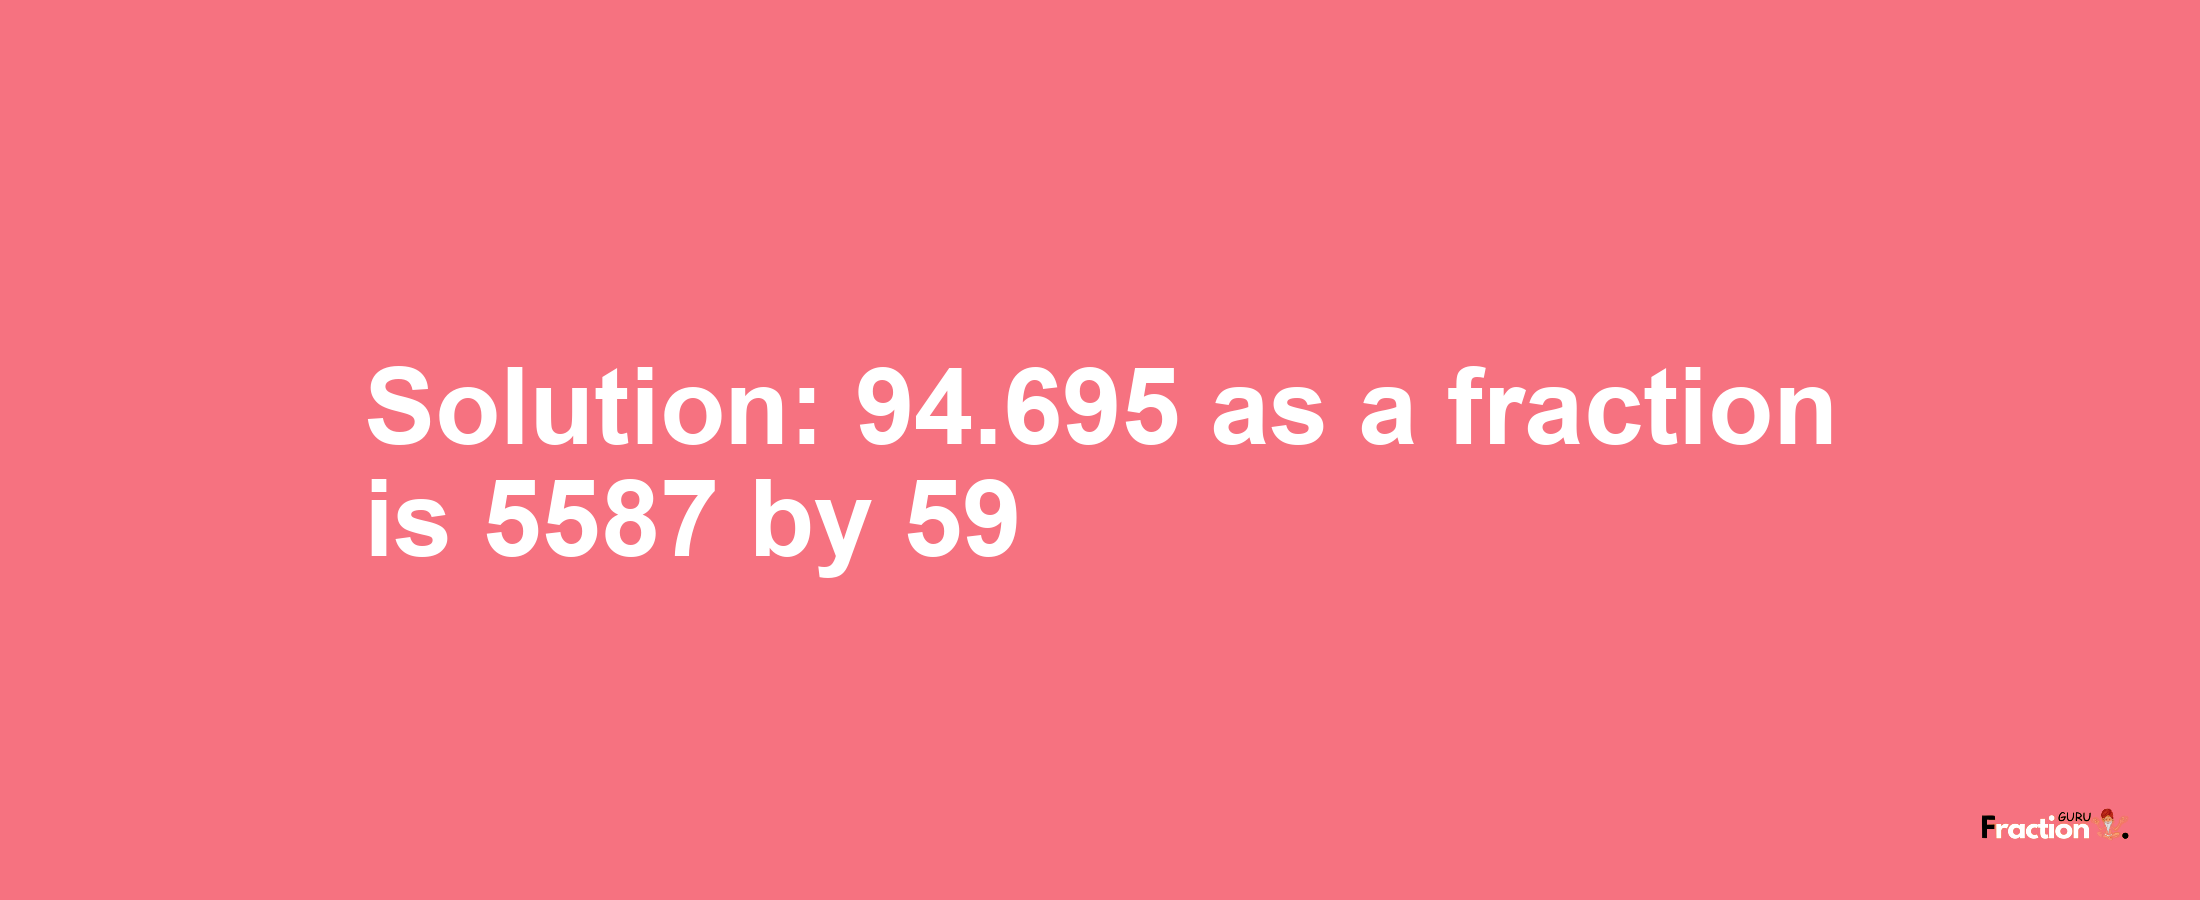 Solution:94.695 as a fraction is 5587/59